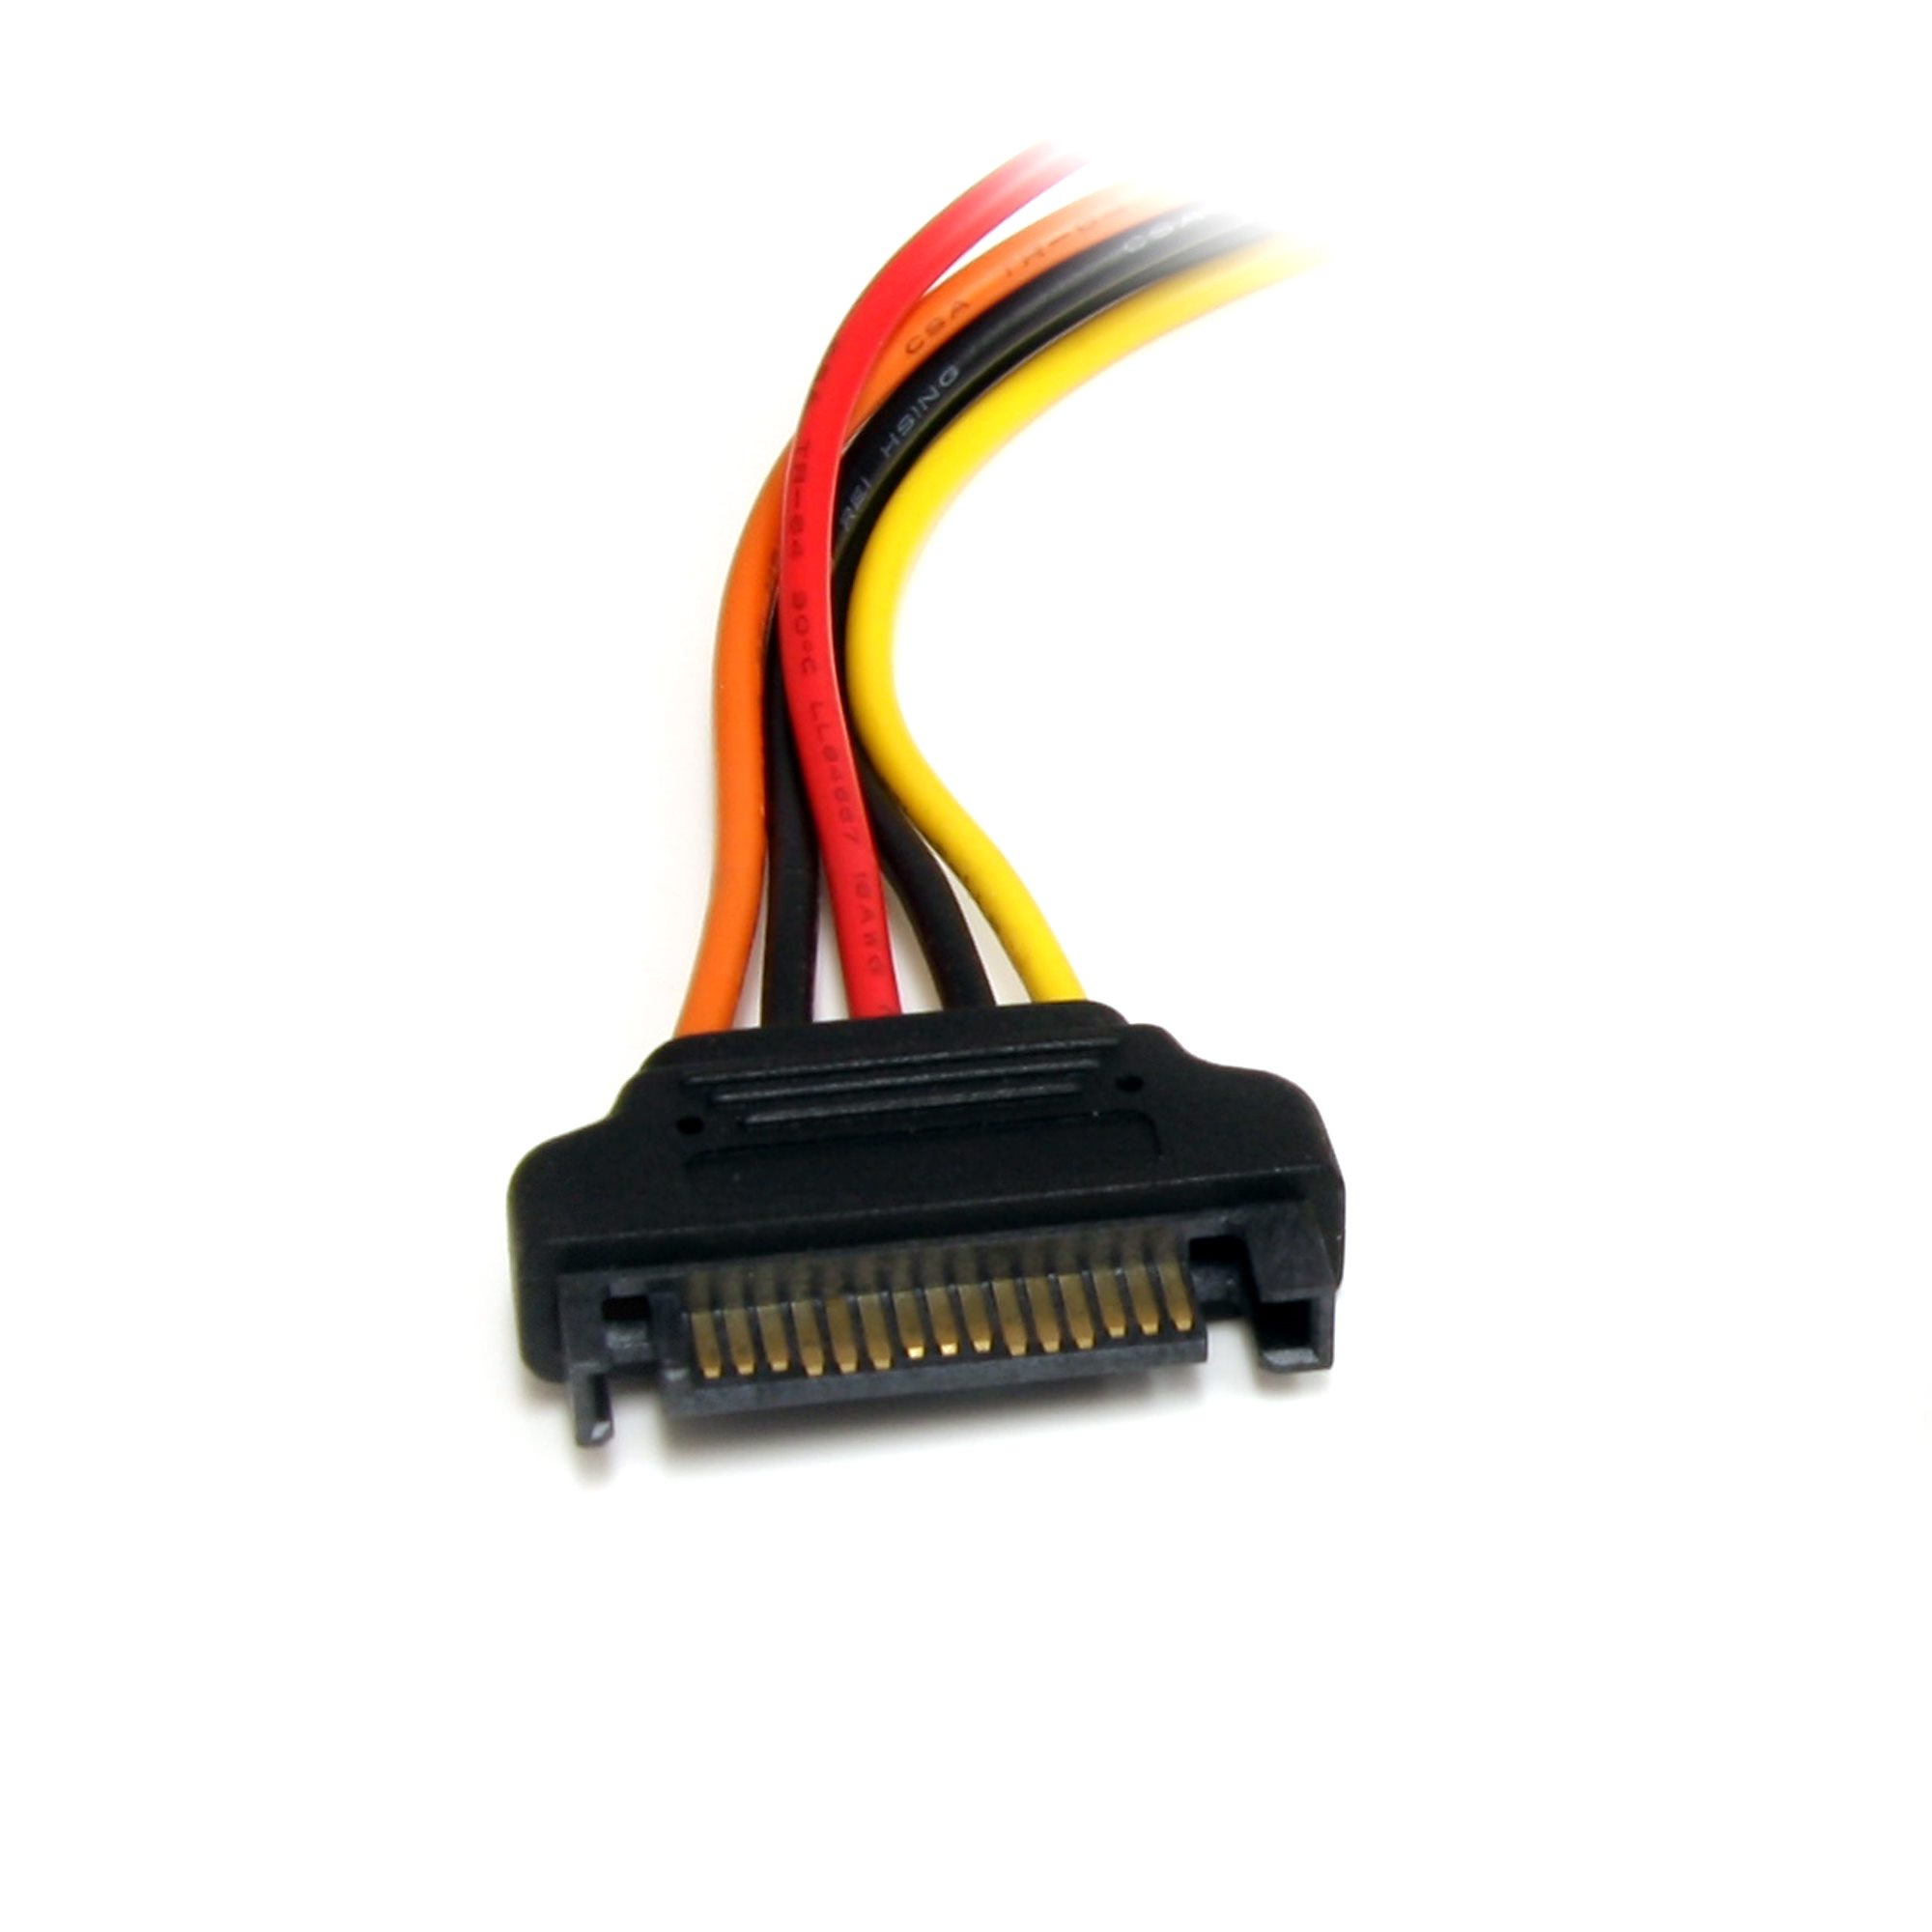 StarTech.com 12in 15 pin SATA Power Extension Cable - SATA Power Extender -  SATAPOWEXT12 - Power Cables 